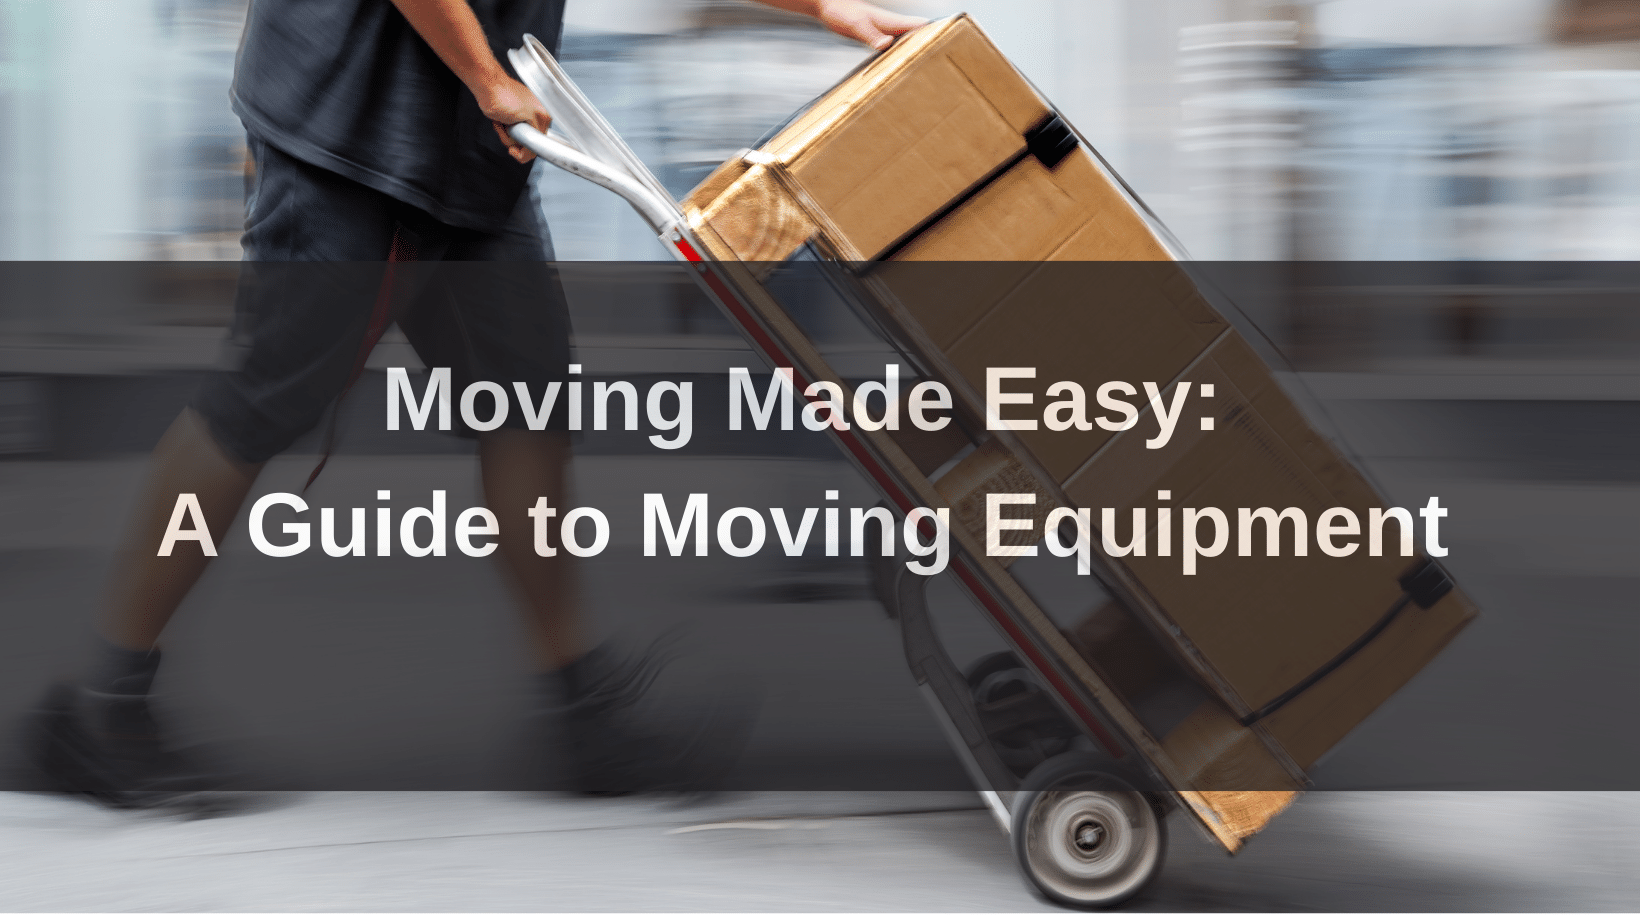 Moving Just Got Easier With Us! Our Moving Box Supplies are